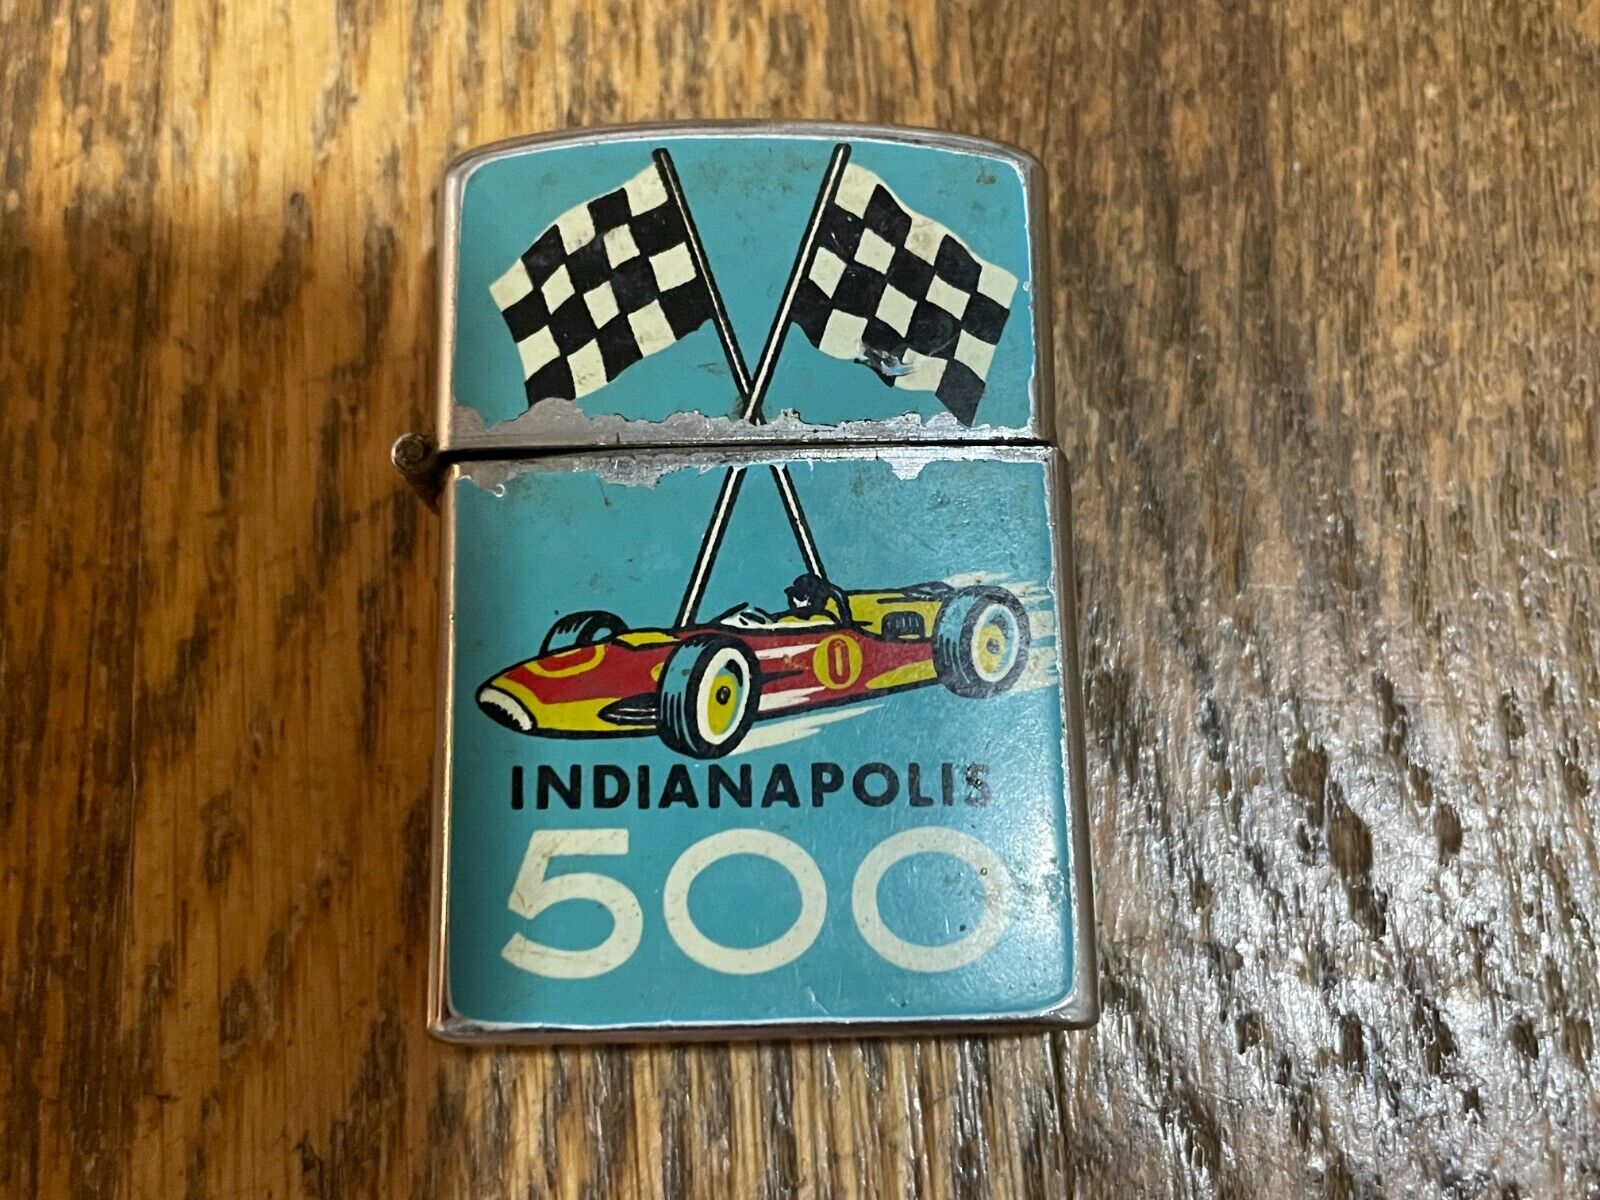 Rare Indianapolis Indy 500 Motor Speedway Reliance Lighter Vintage